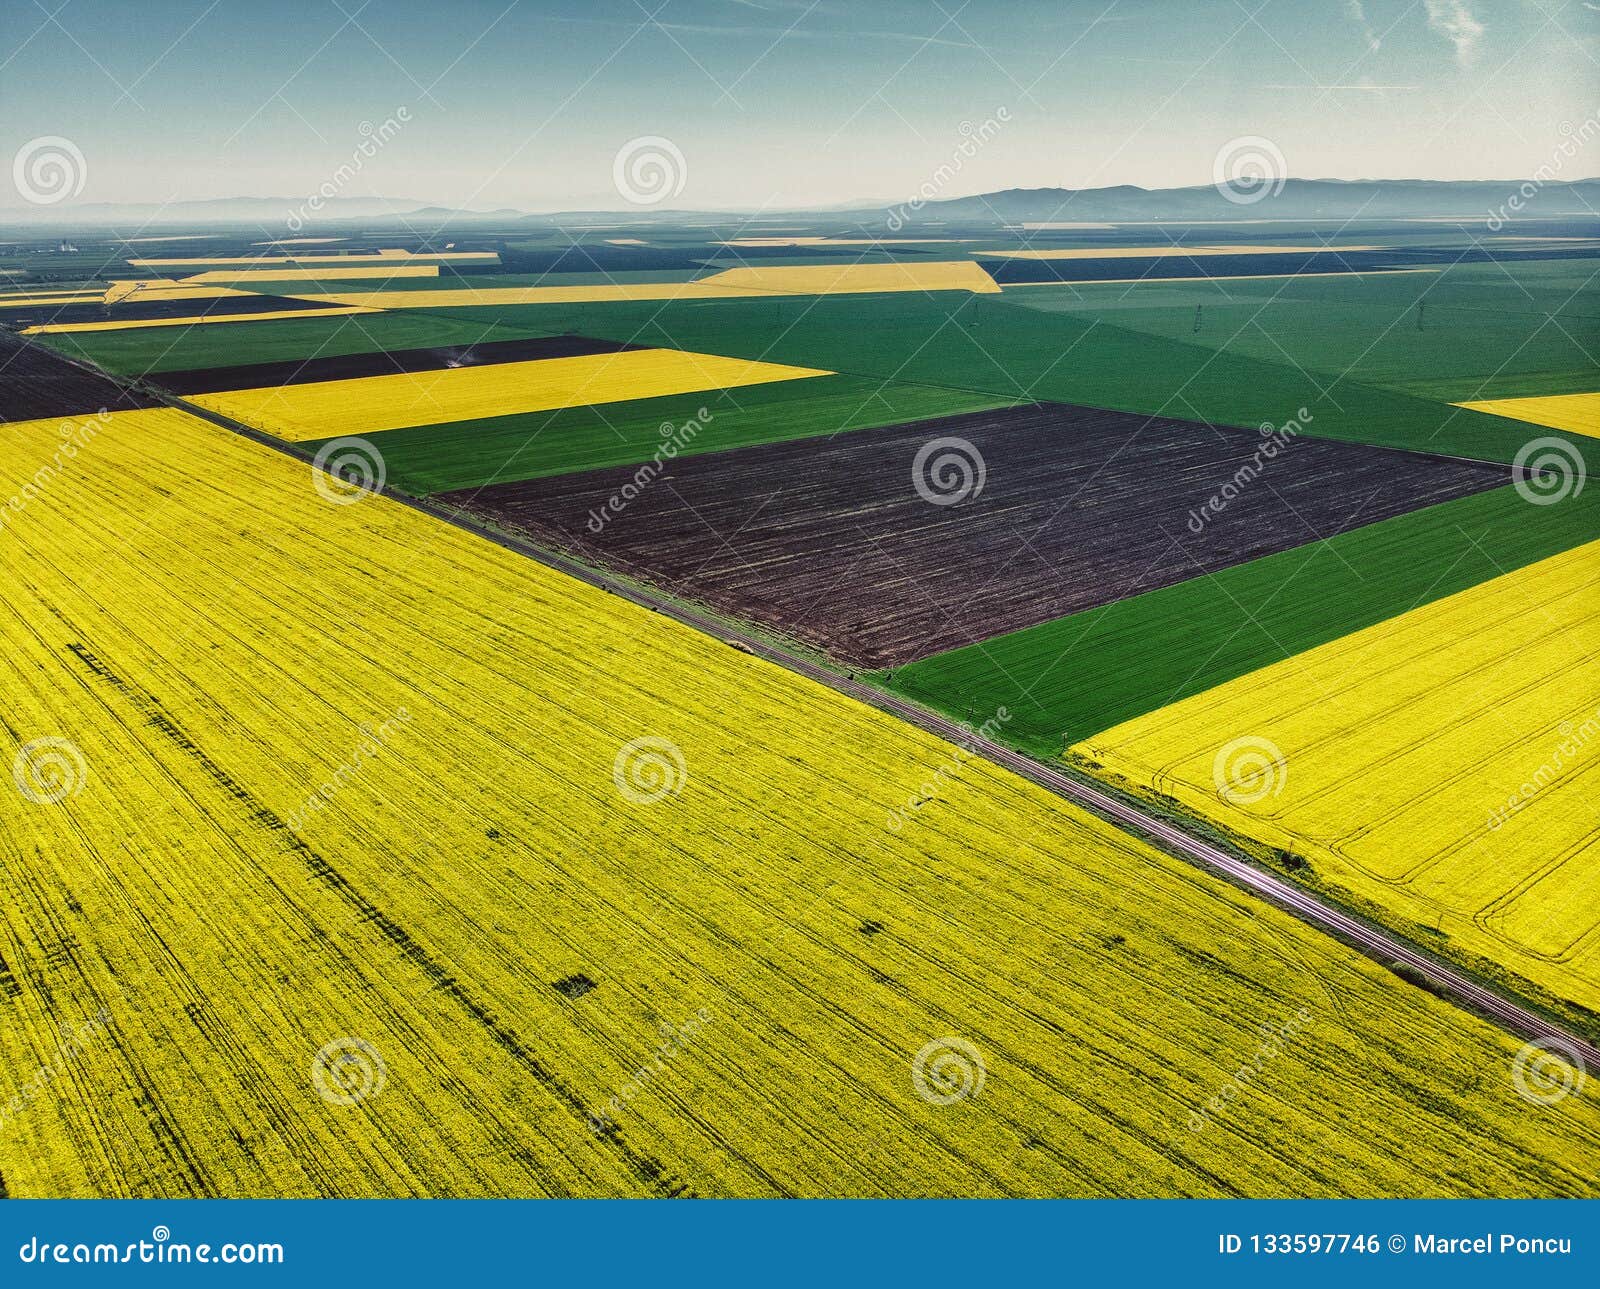 Aerial View of Oilseed Field Ready for Harvester Stock Photo - Image of ...